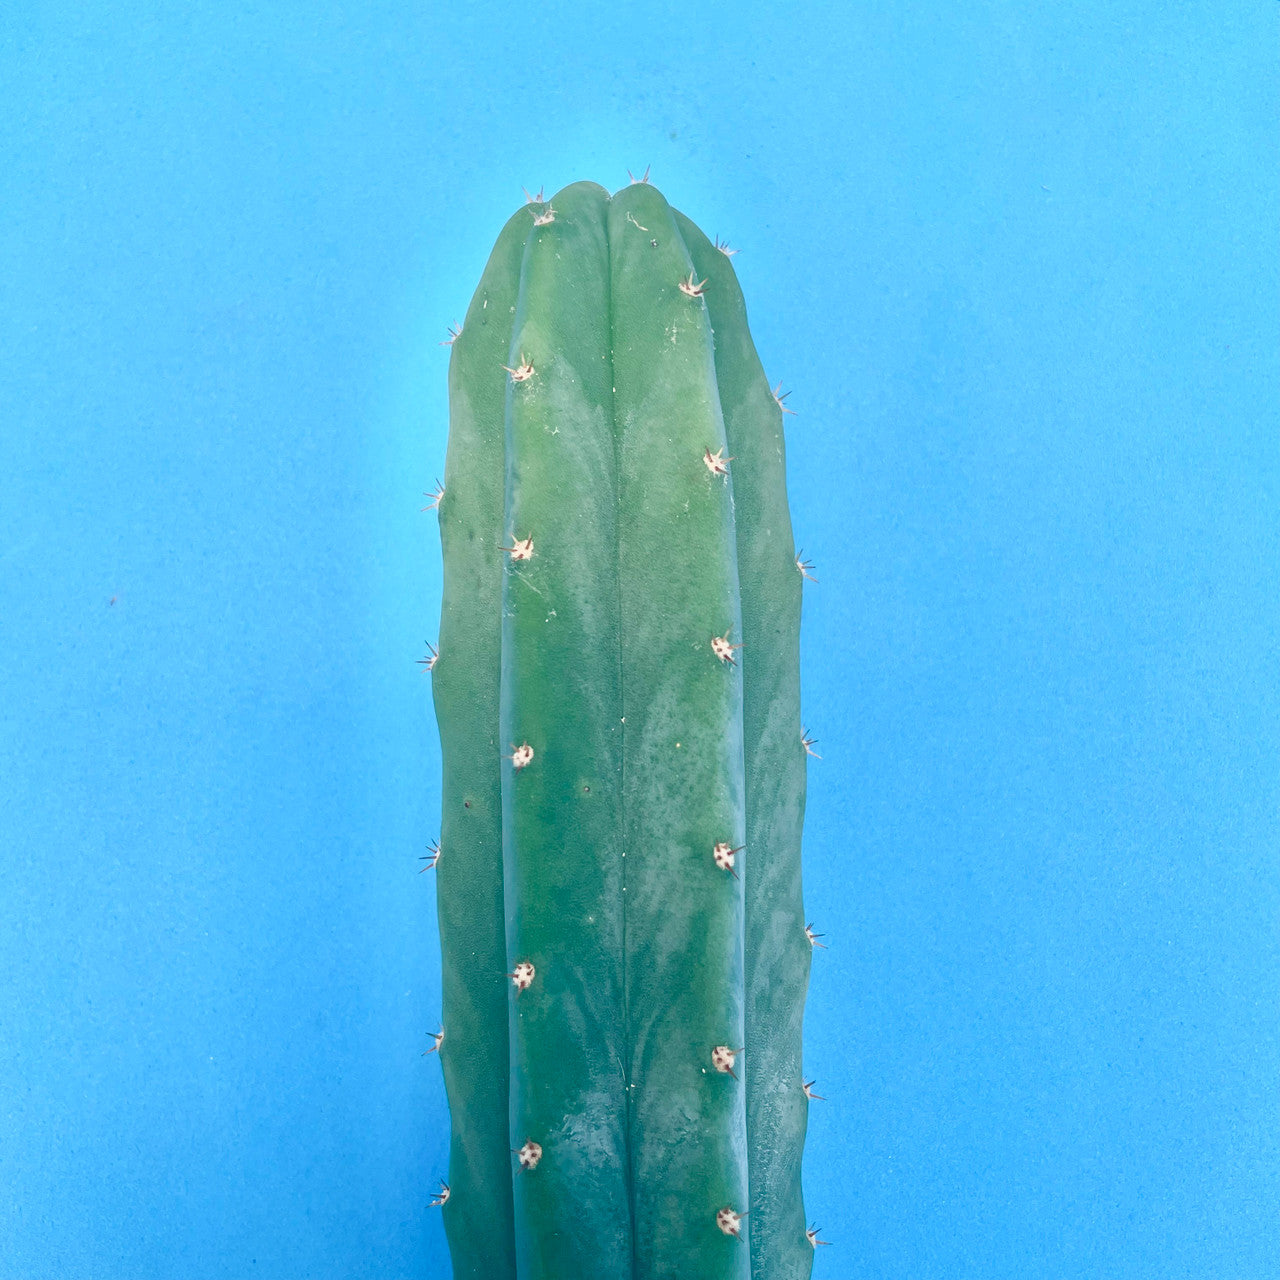 Echinopsis Pachanoi with a blue background